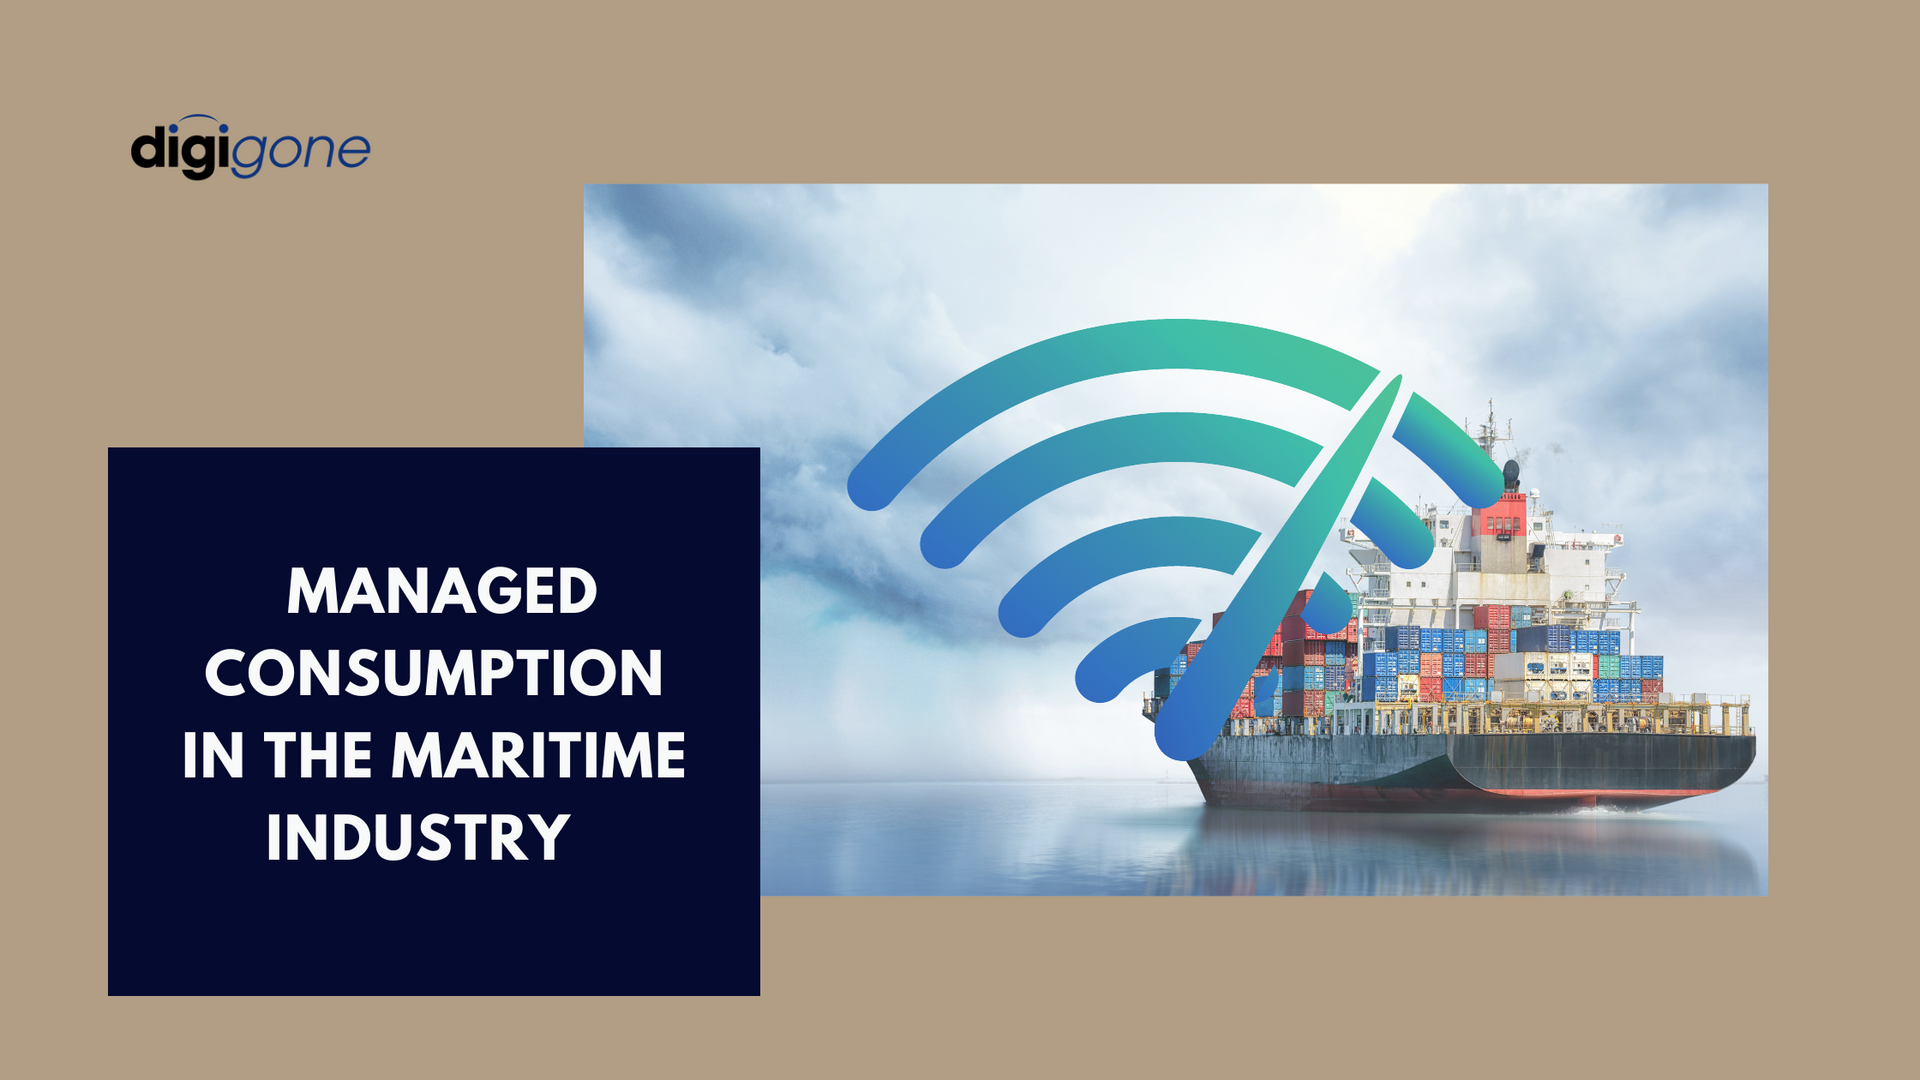 internet usage in the maritime industry